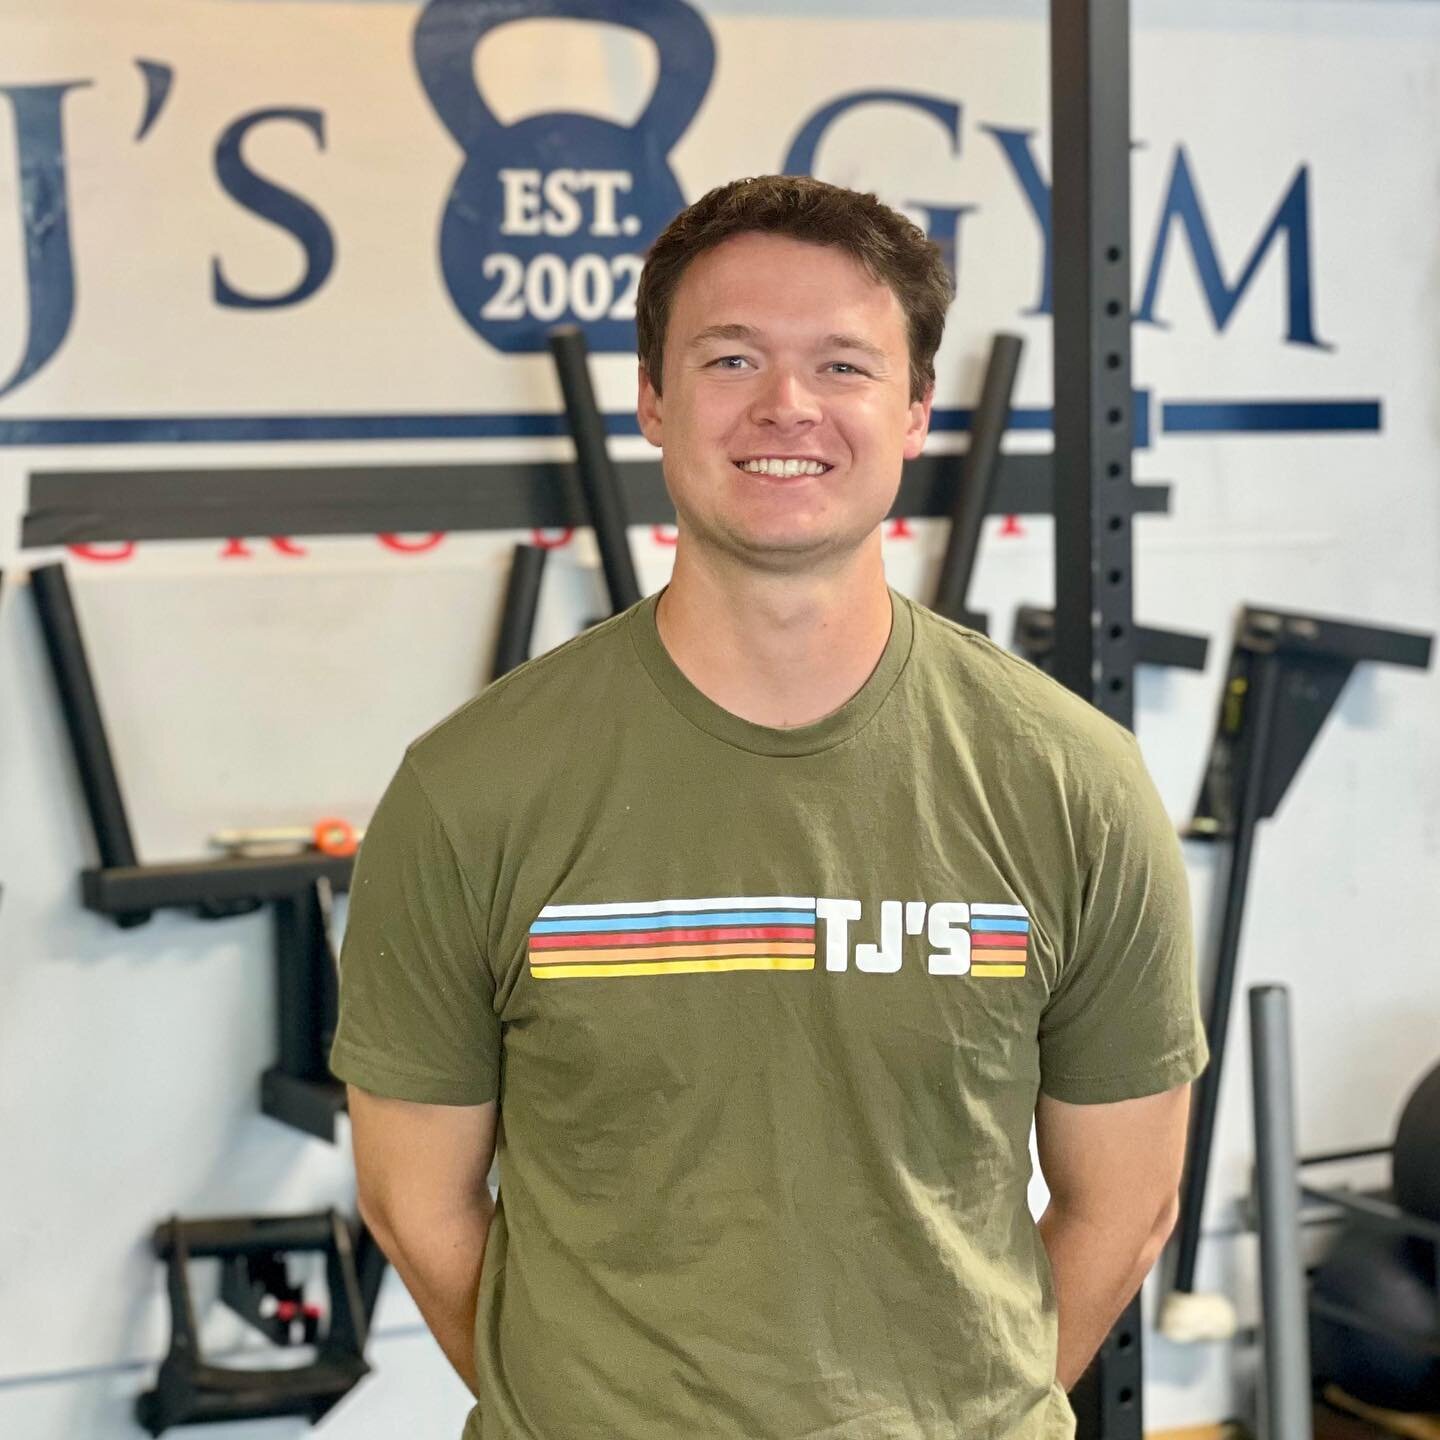 Warm welcome to Coach Alex! A former D1 baseball player, he&rsquo;s currently the Pitching Coach at COM, and we&rsquo;re excited to have him coaching fitness at #tjsgym when he&rsquo;s not on the baseball field! Swipe to see an awesome program he&rsq